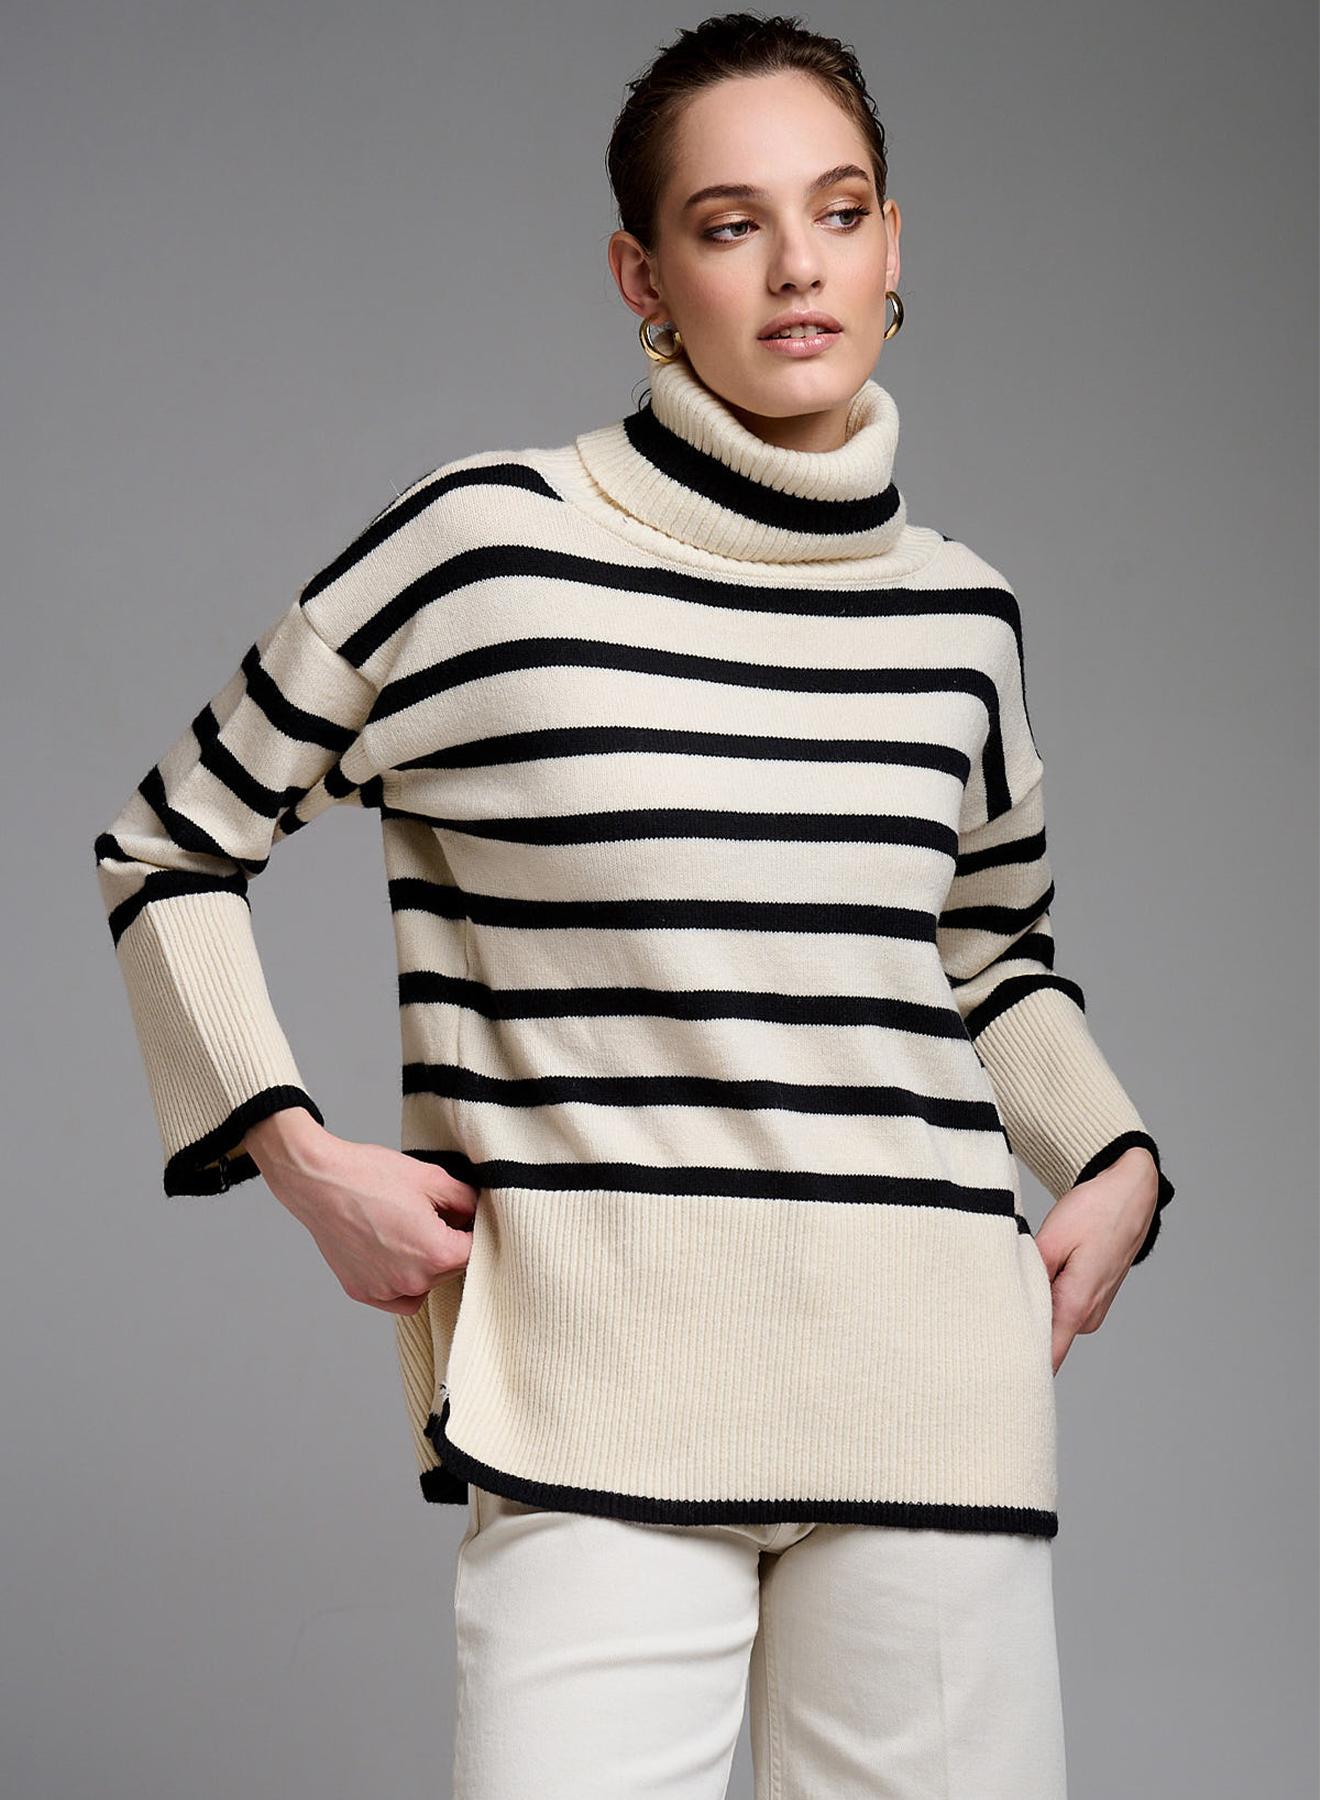 Turtleneck sweater with stripes - 1